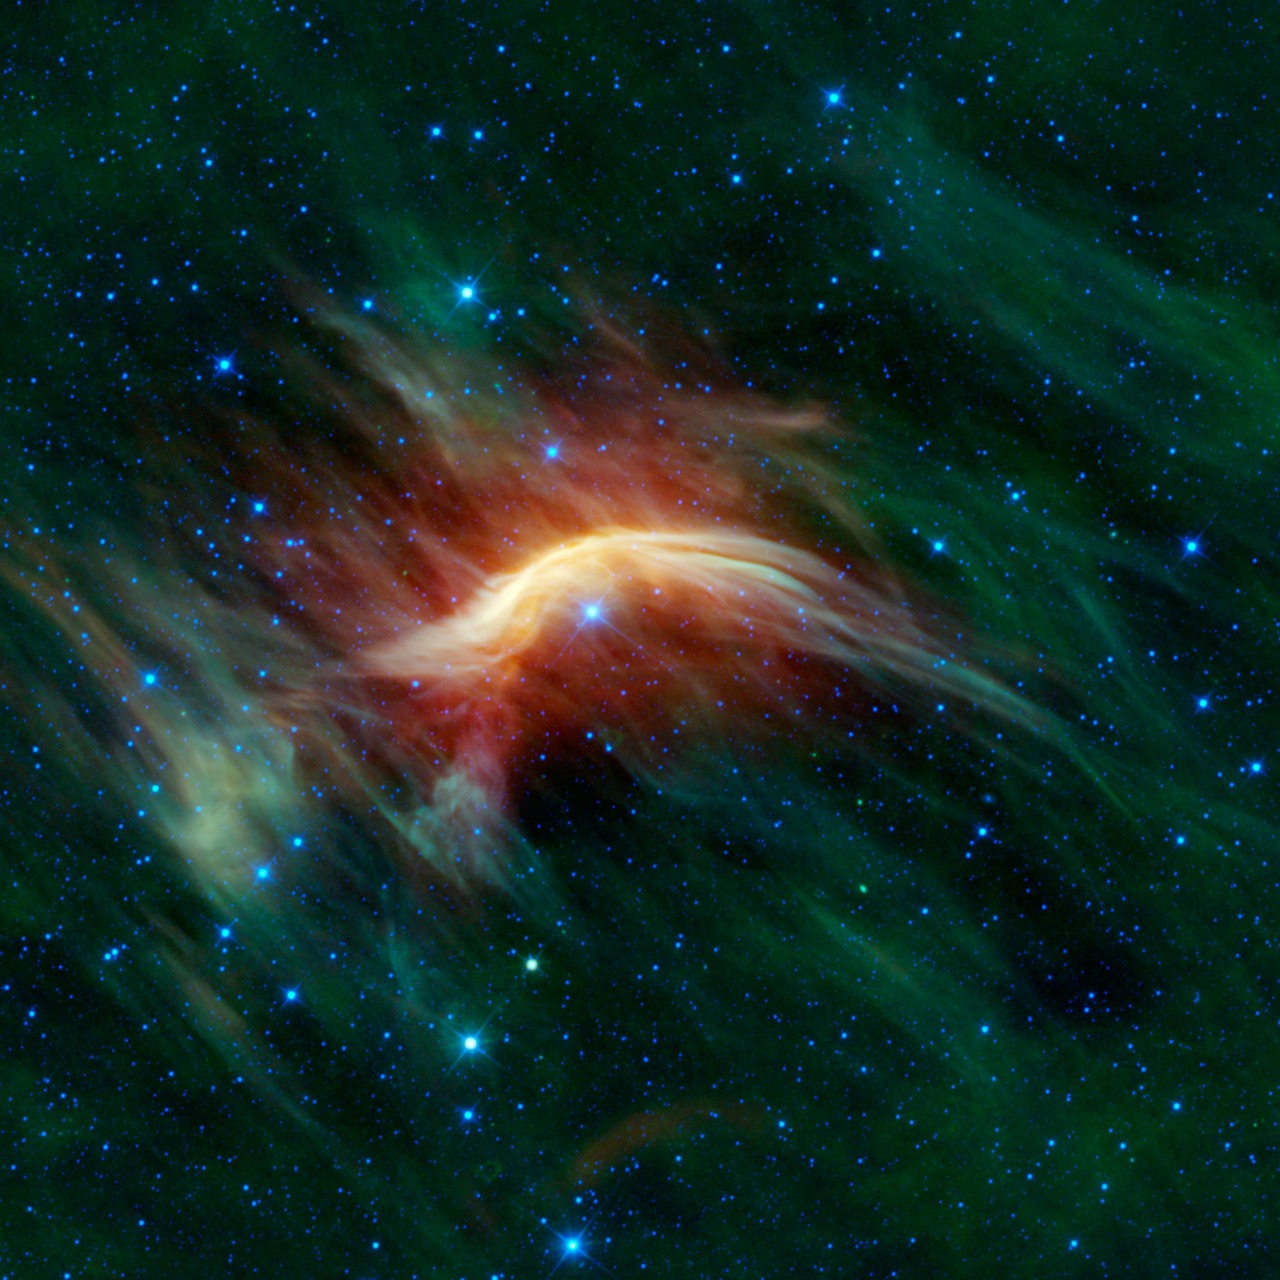 zeta ophiuchi,runaway star,interstellar bugenwelle,hiking star,stellar wind,bumper front,green,galaxy,starry sky,space,universe,all,night sky,sky,astronautics,nasa,space travel,astronomy,science,research,free pictures, free photos, free images, royalty free, free illustrations, public domain